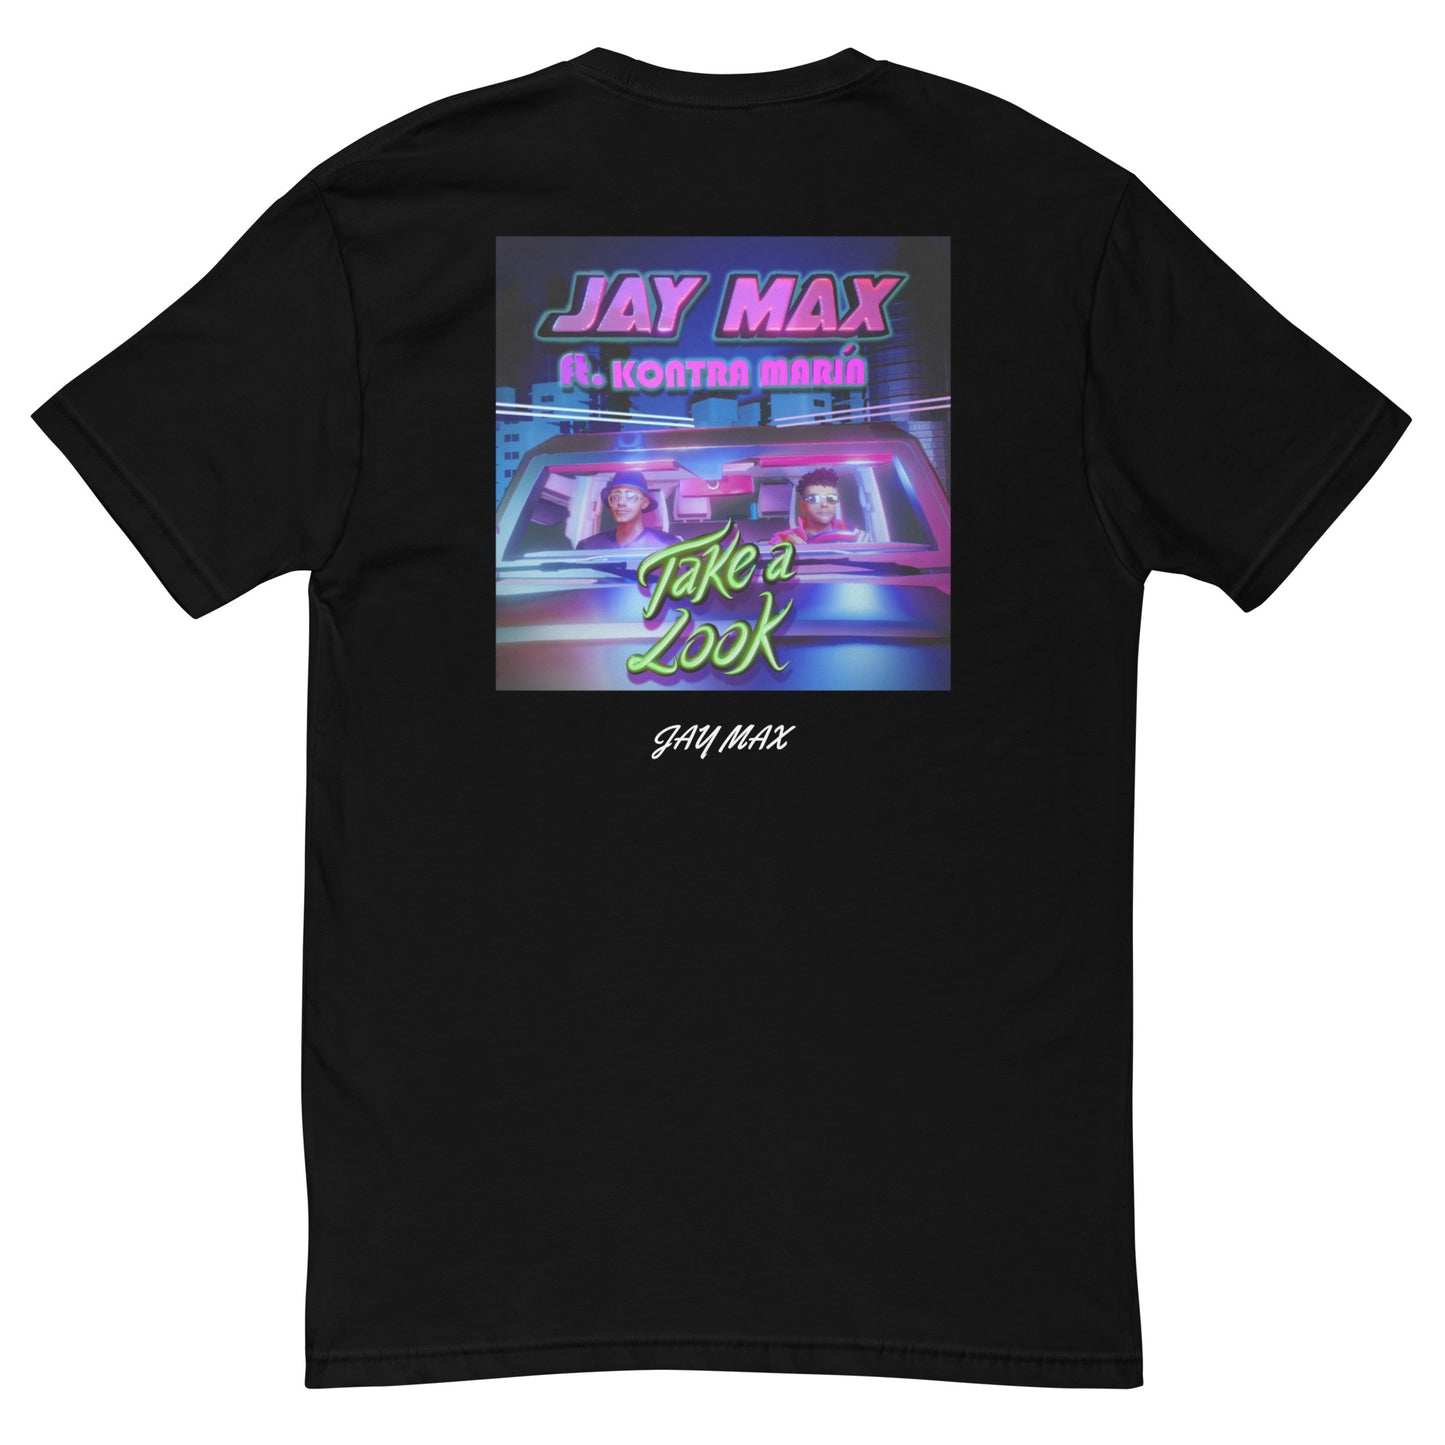 TAKE A LOOK by JAY MAX Men's Short Sleeve T-shirt